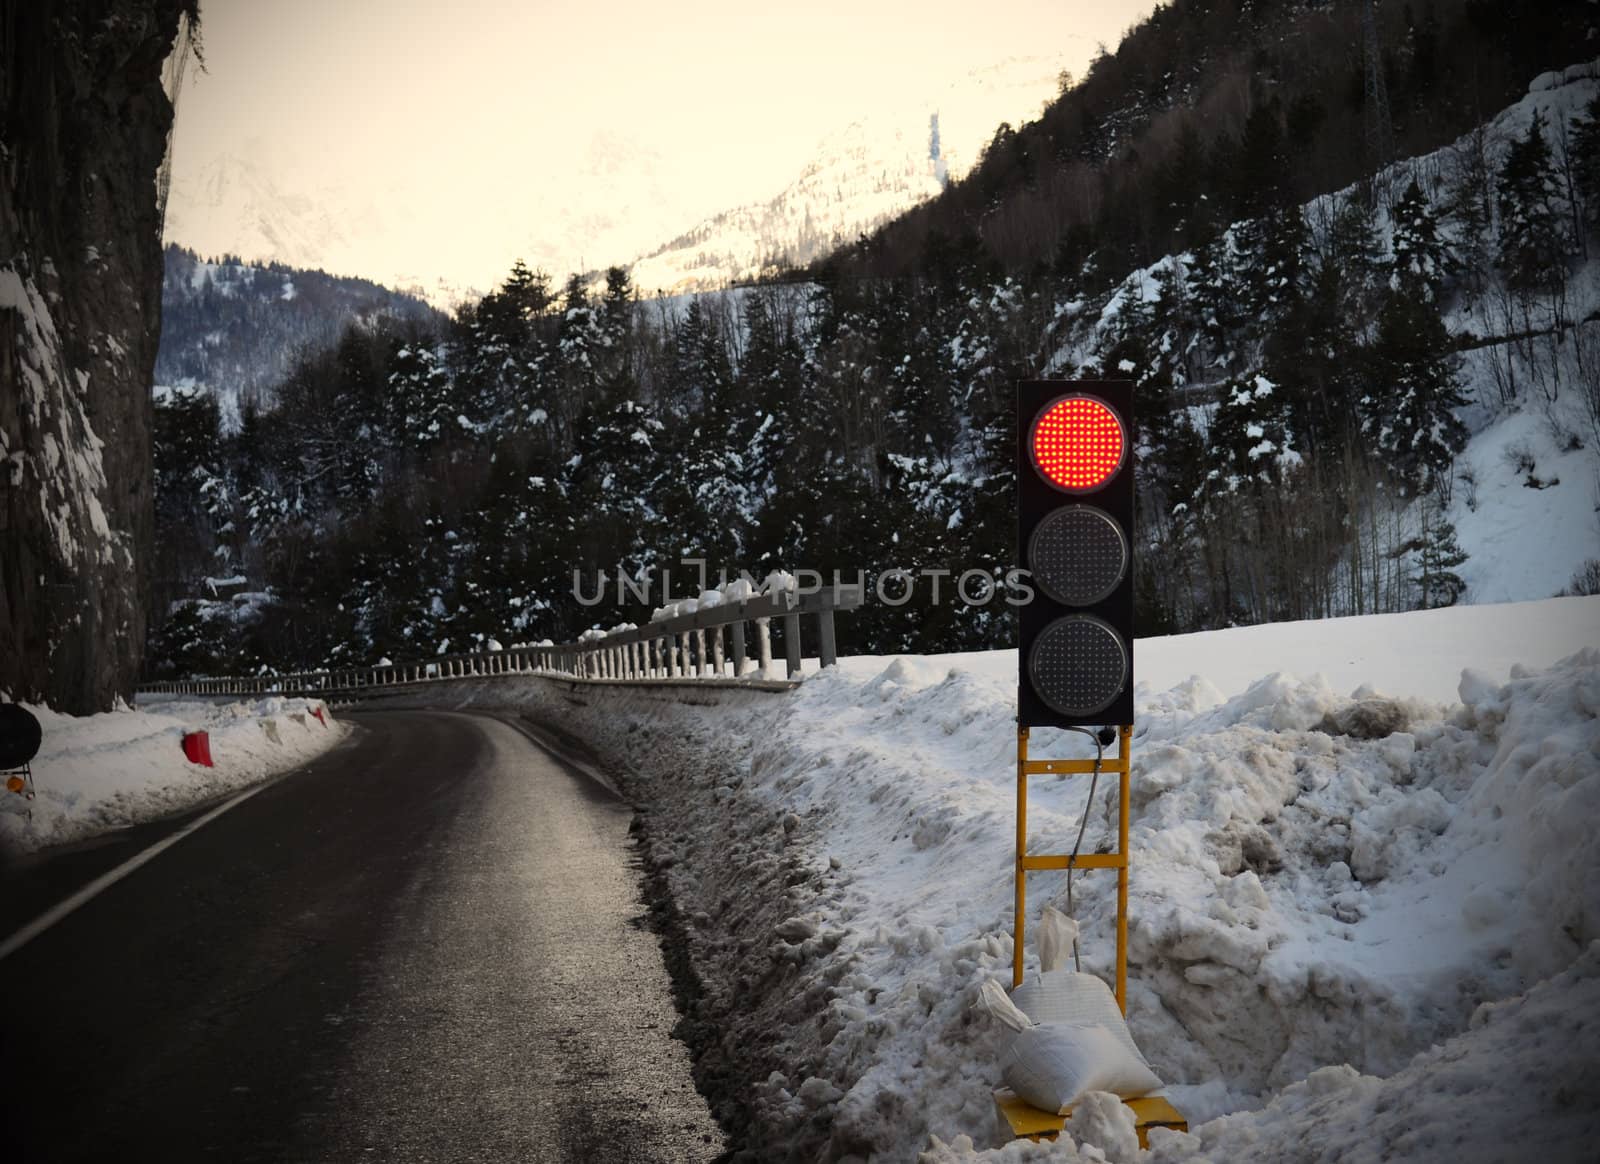 Red traffic light for snow or bad weather by artofphoto